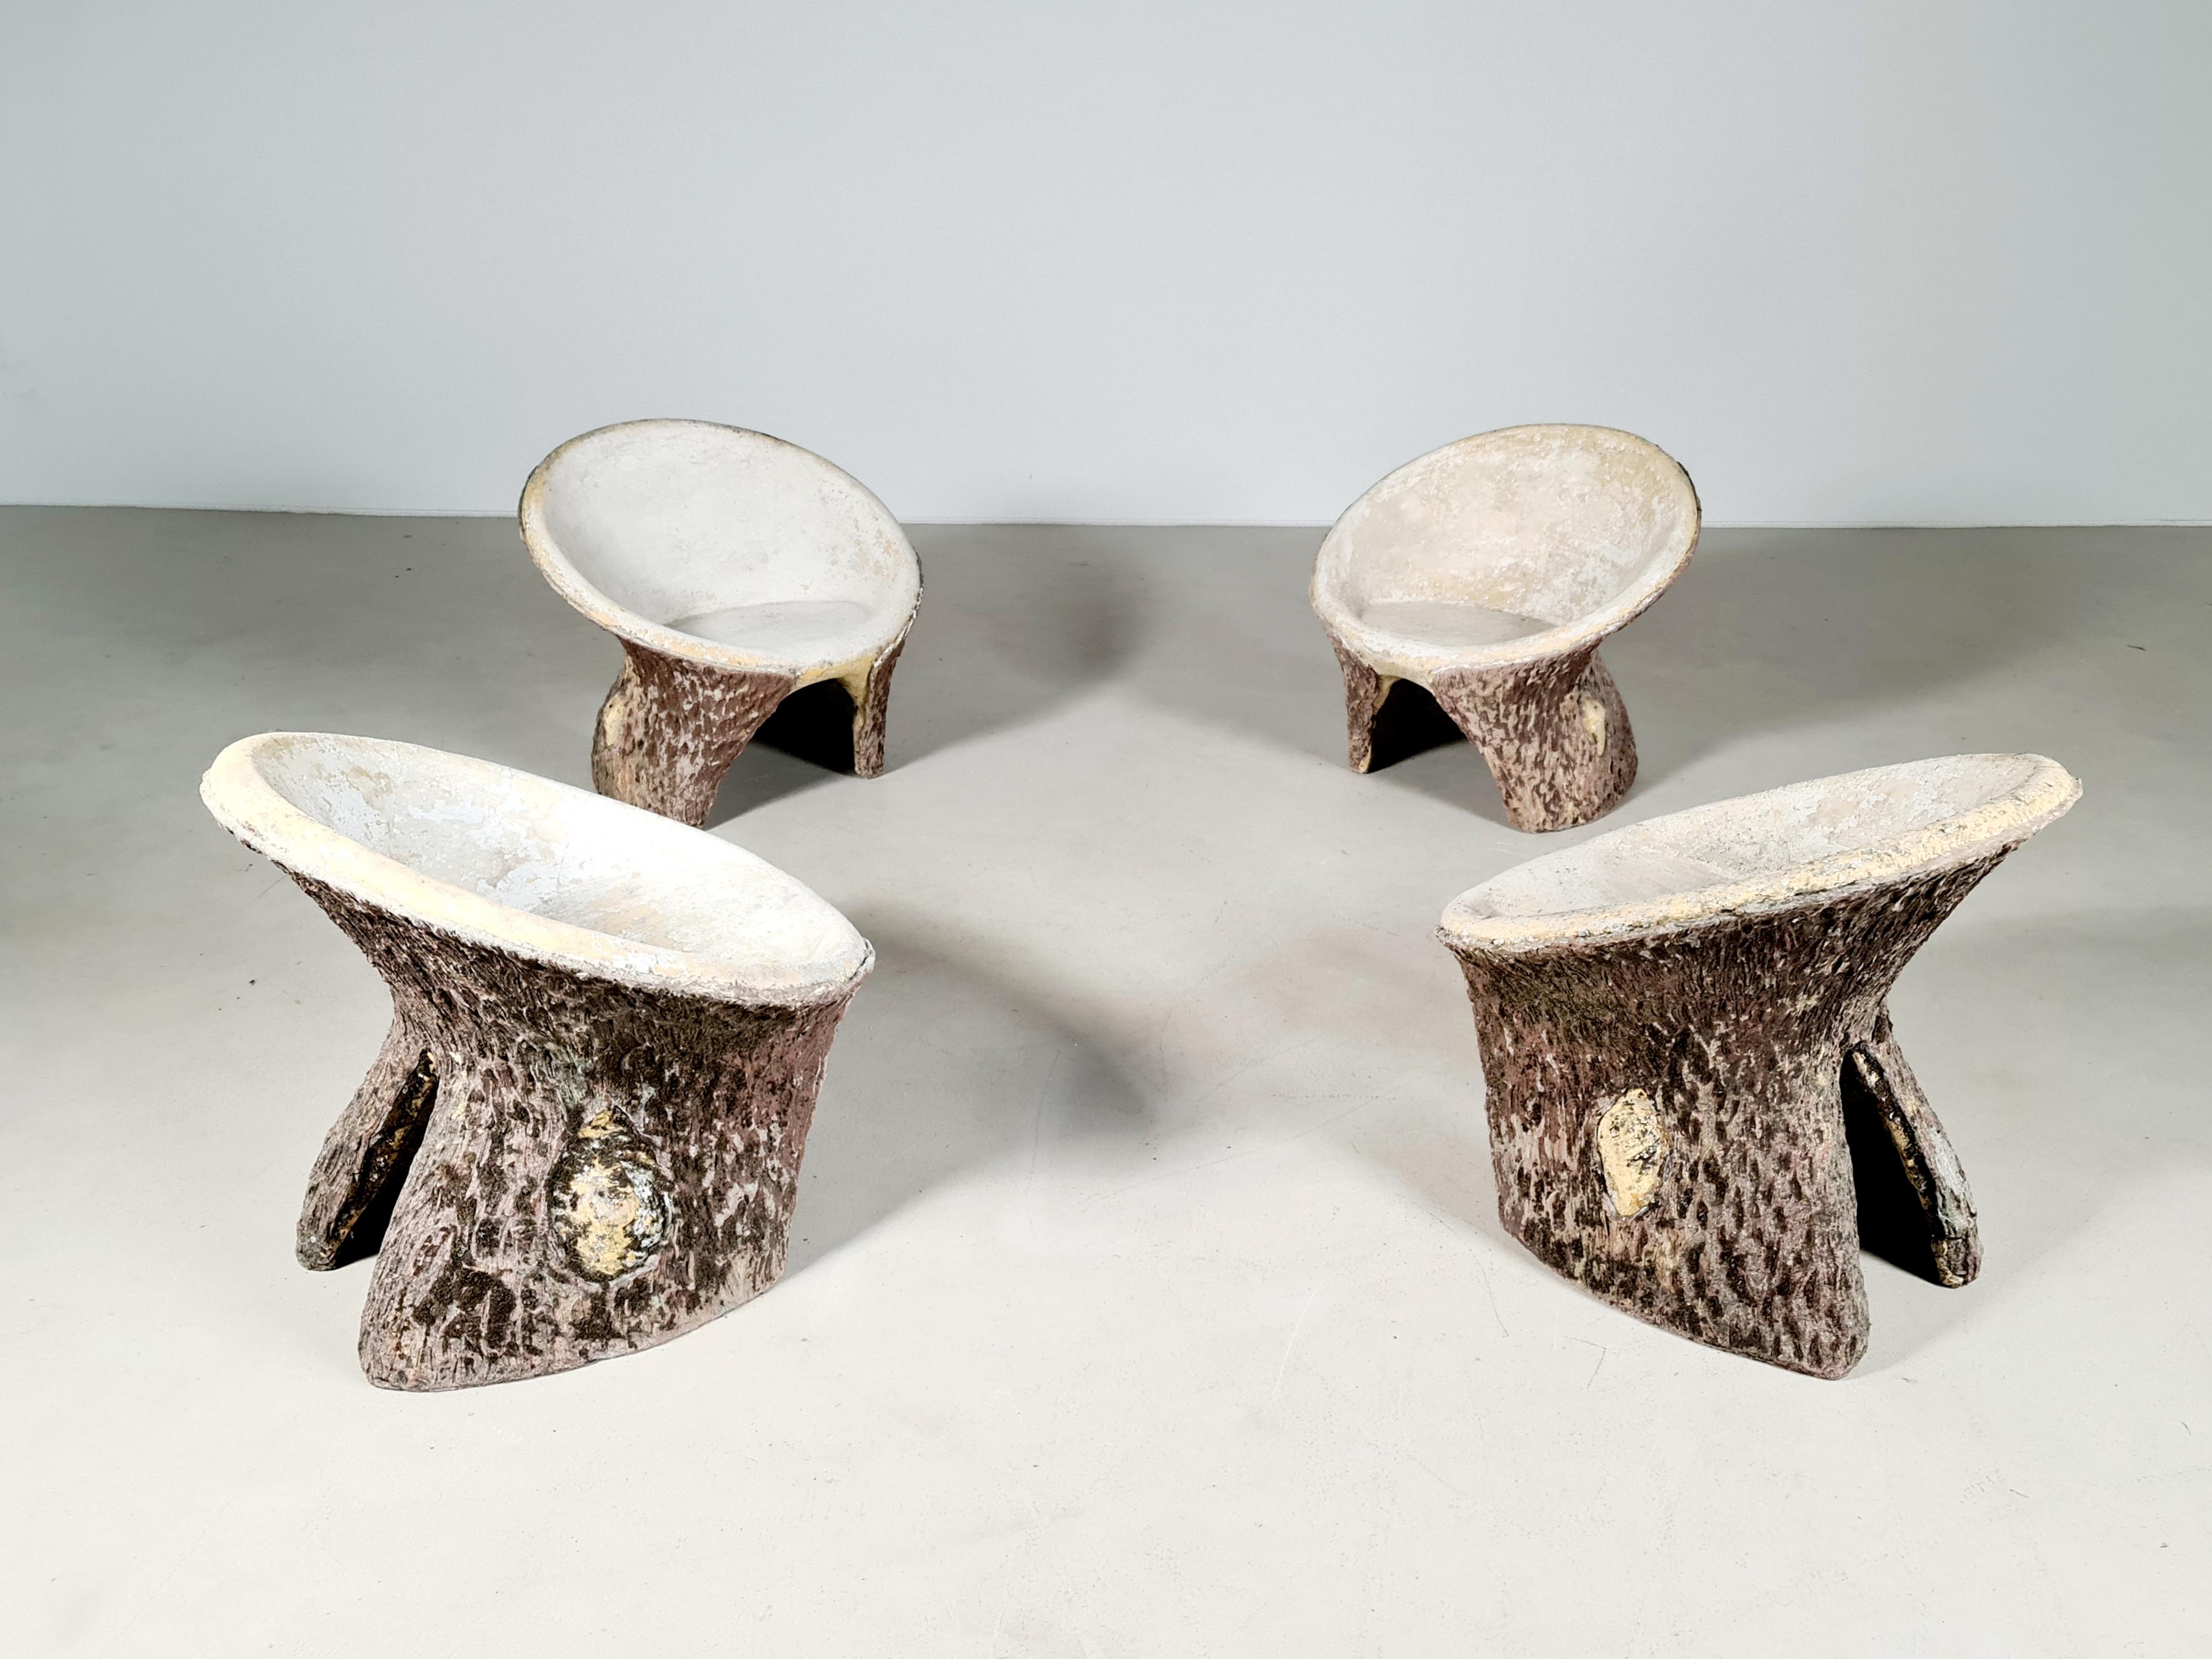 Very rare set of 4 concrete outdoor chairs from Italy, 1960s. Inspired by tree trunks. Very decorative objects.